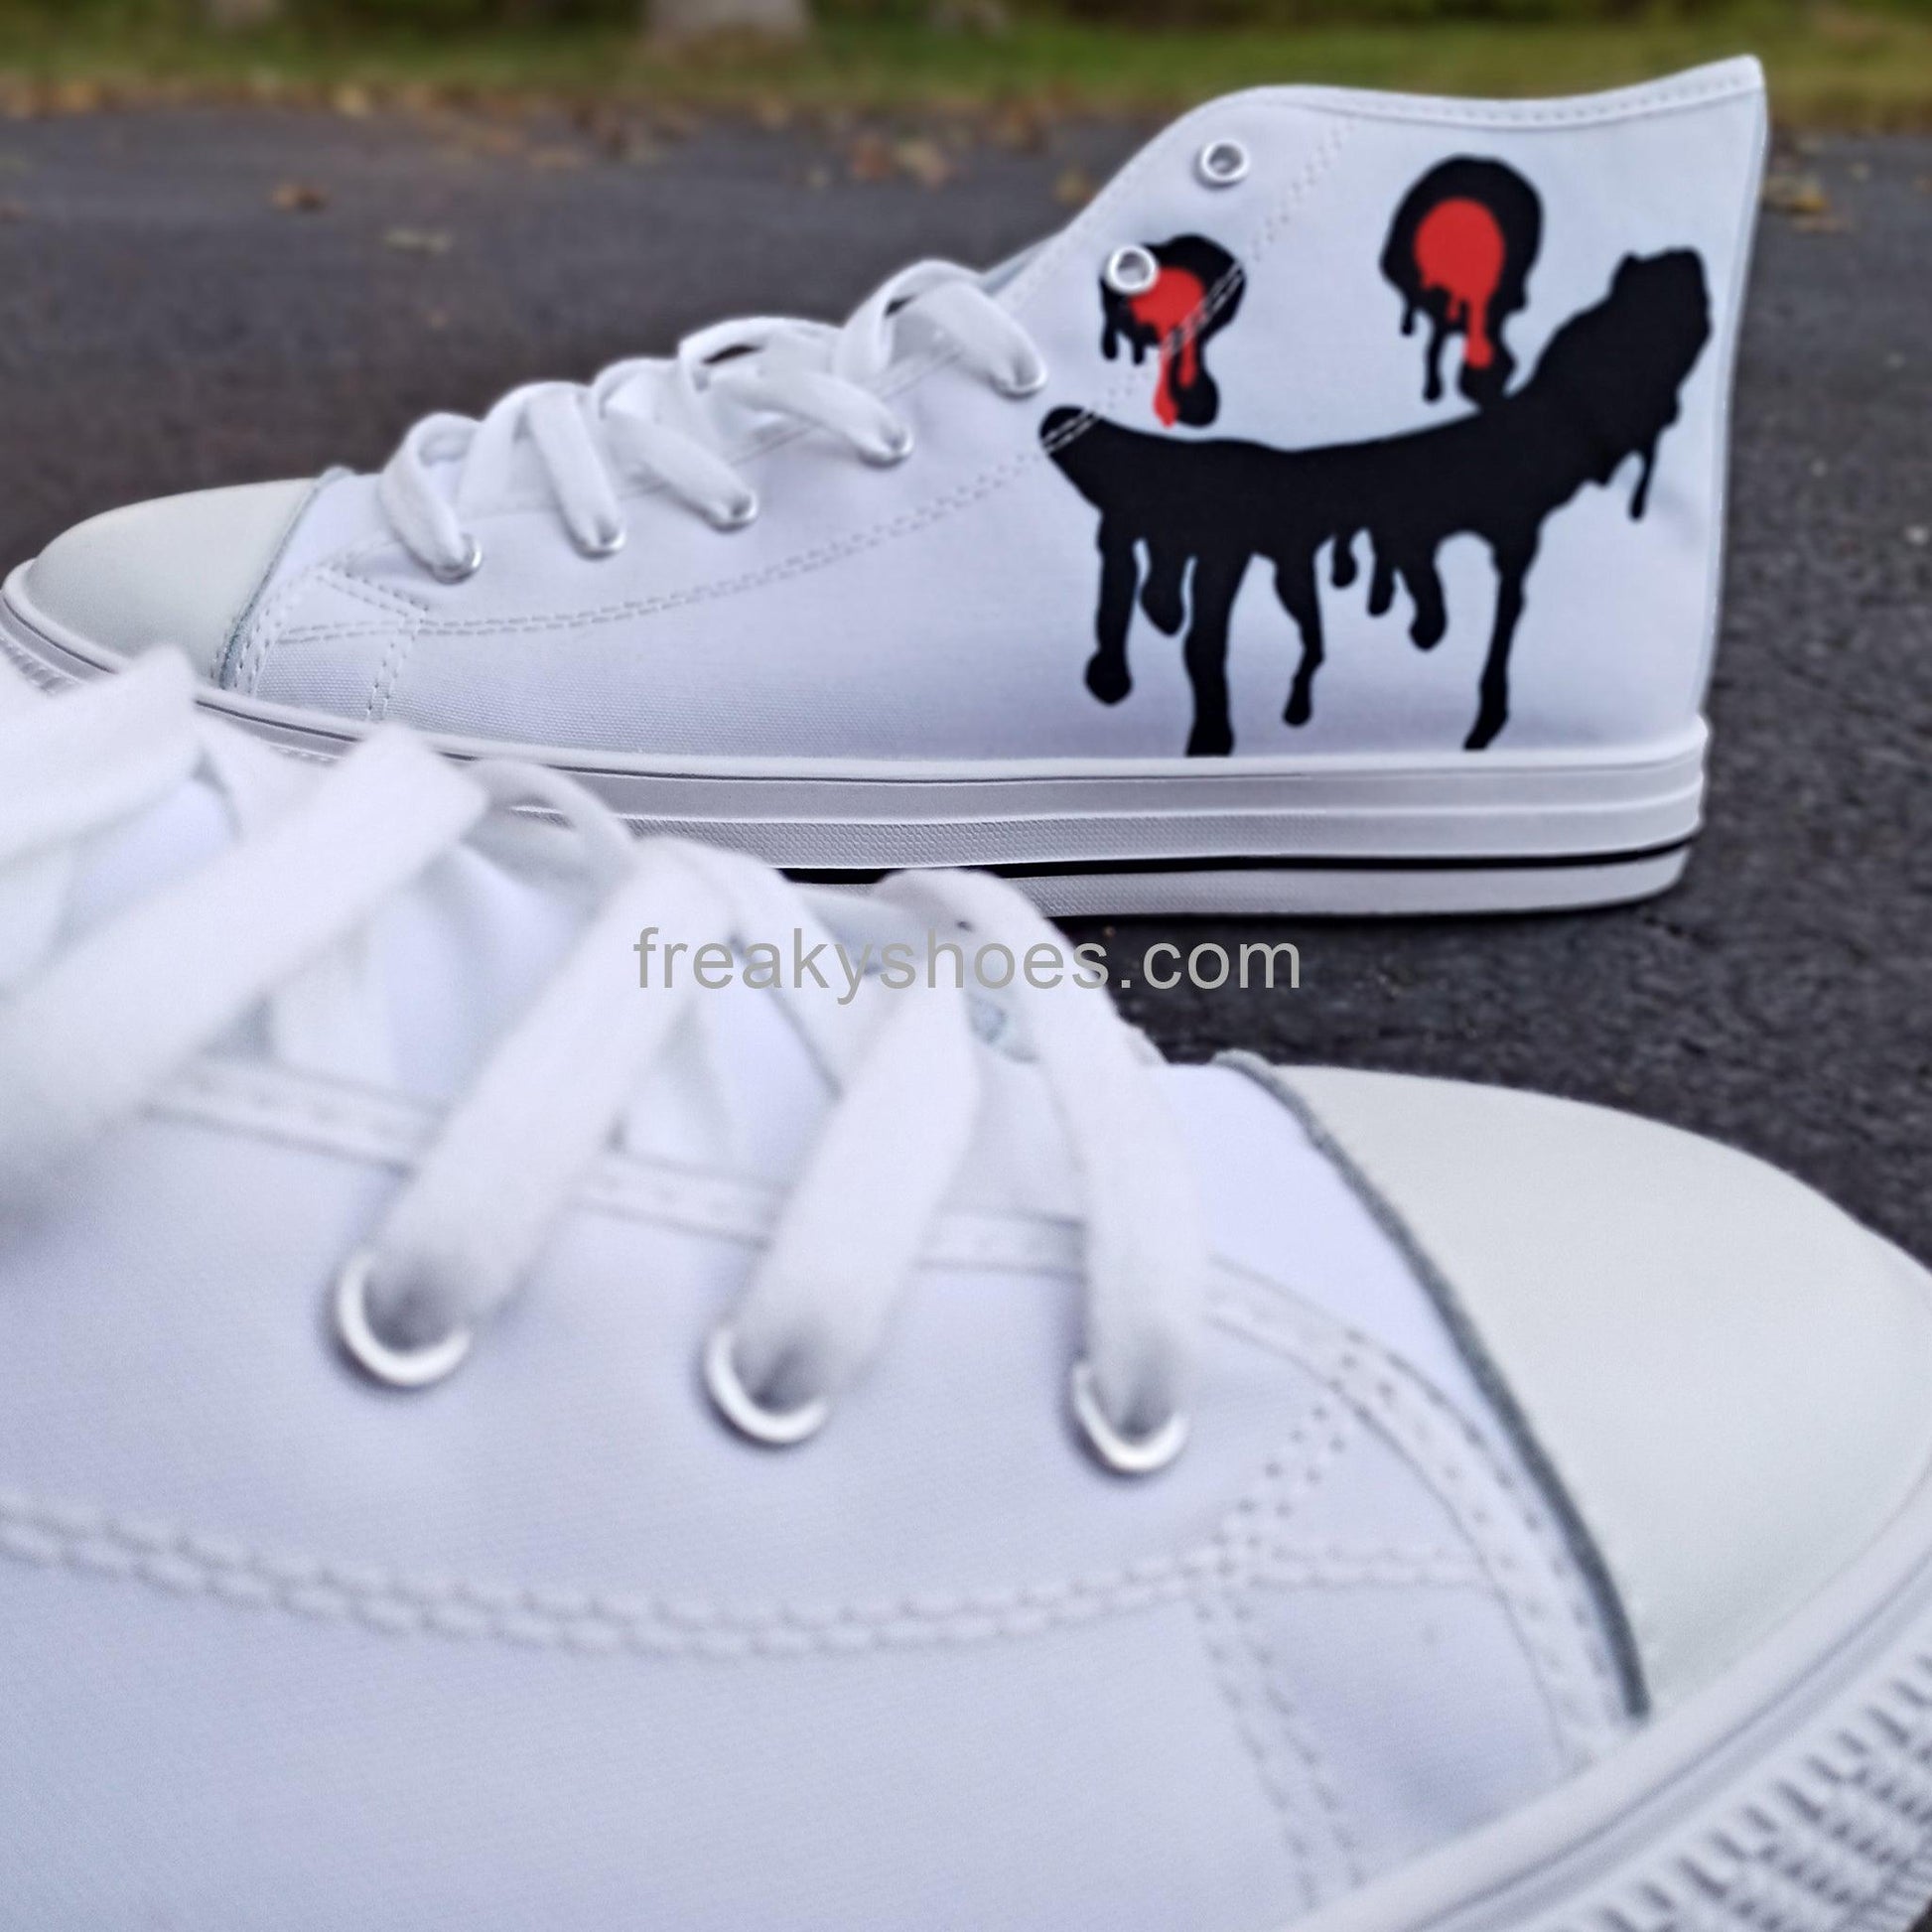 Freaky Shoes Men - Freaky Shoes®